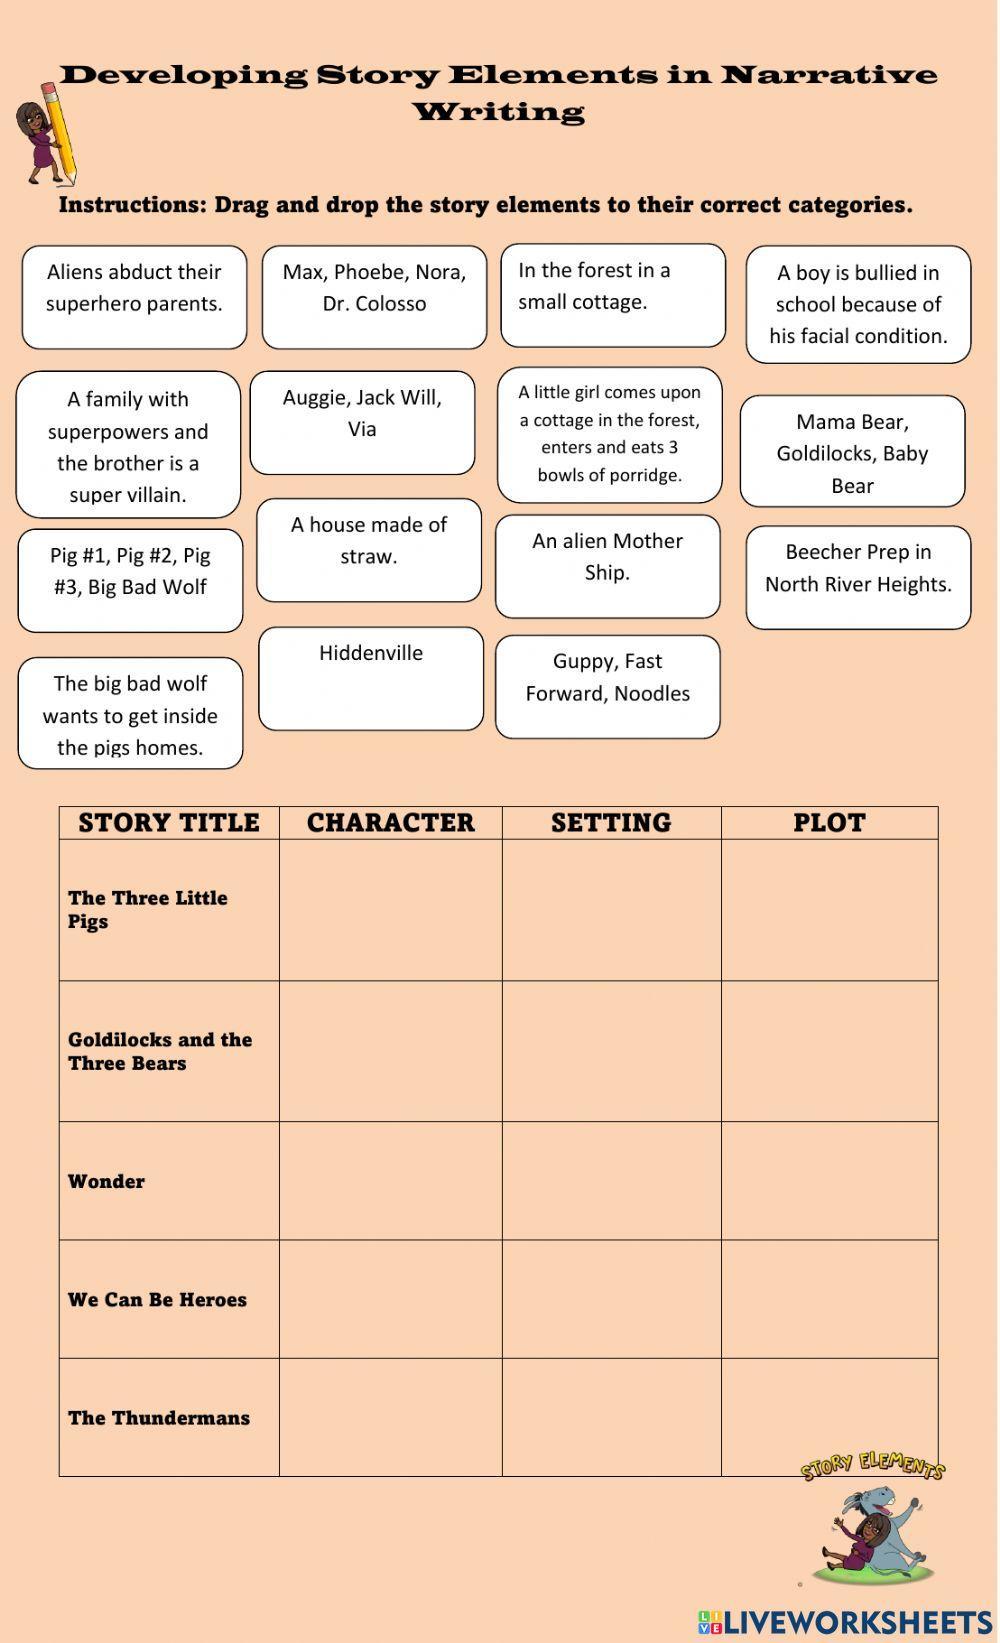 Developing Story Elements in Narrative Writing